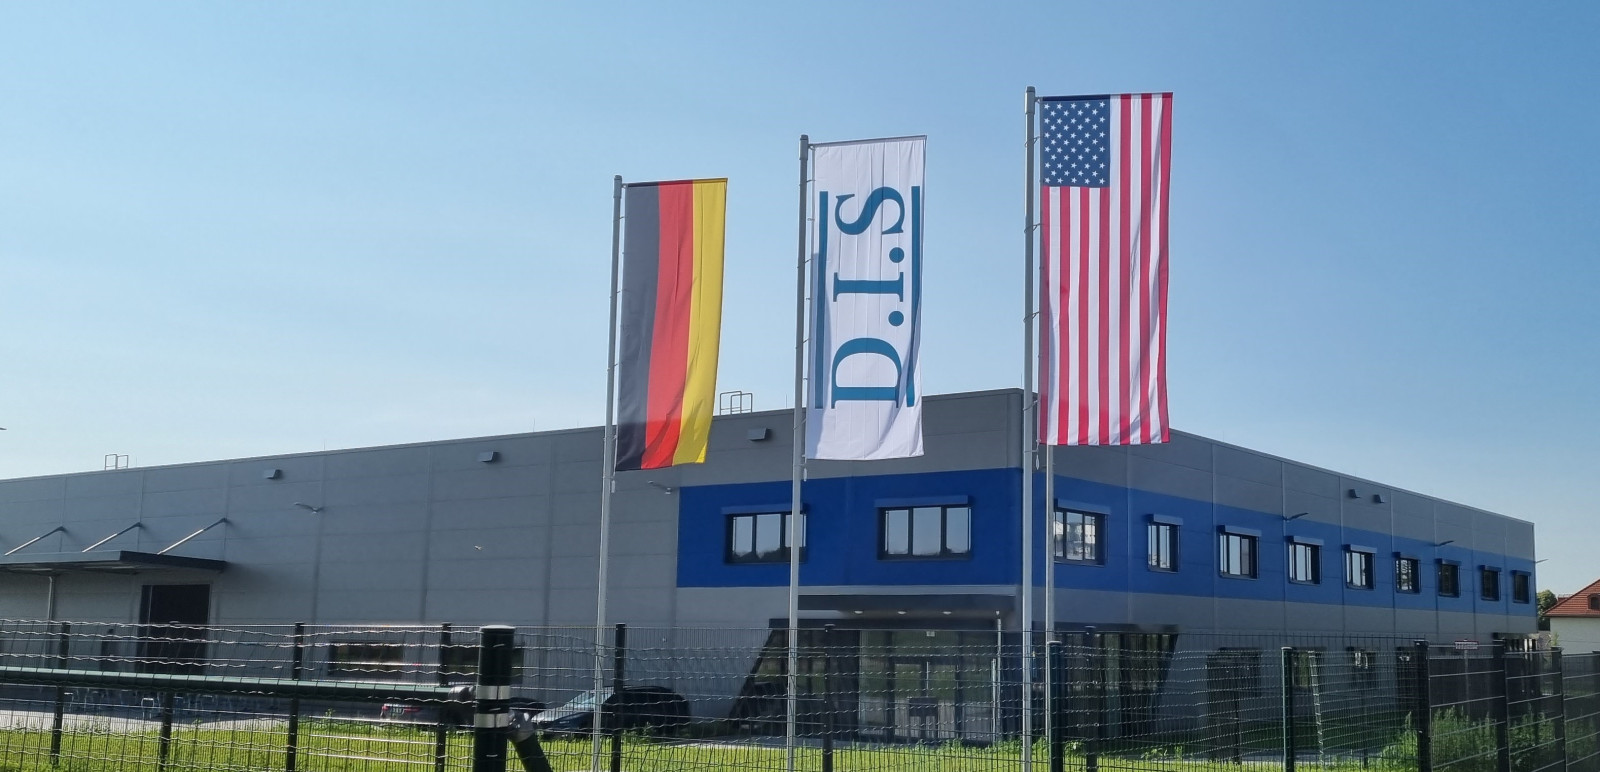 D.I.S site in Pirna at day